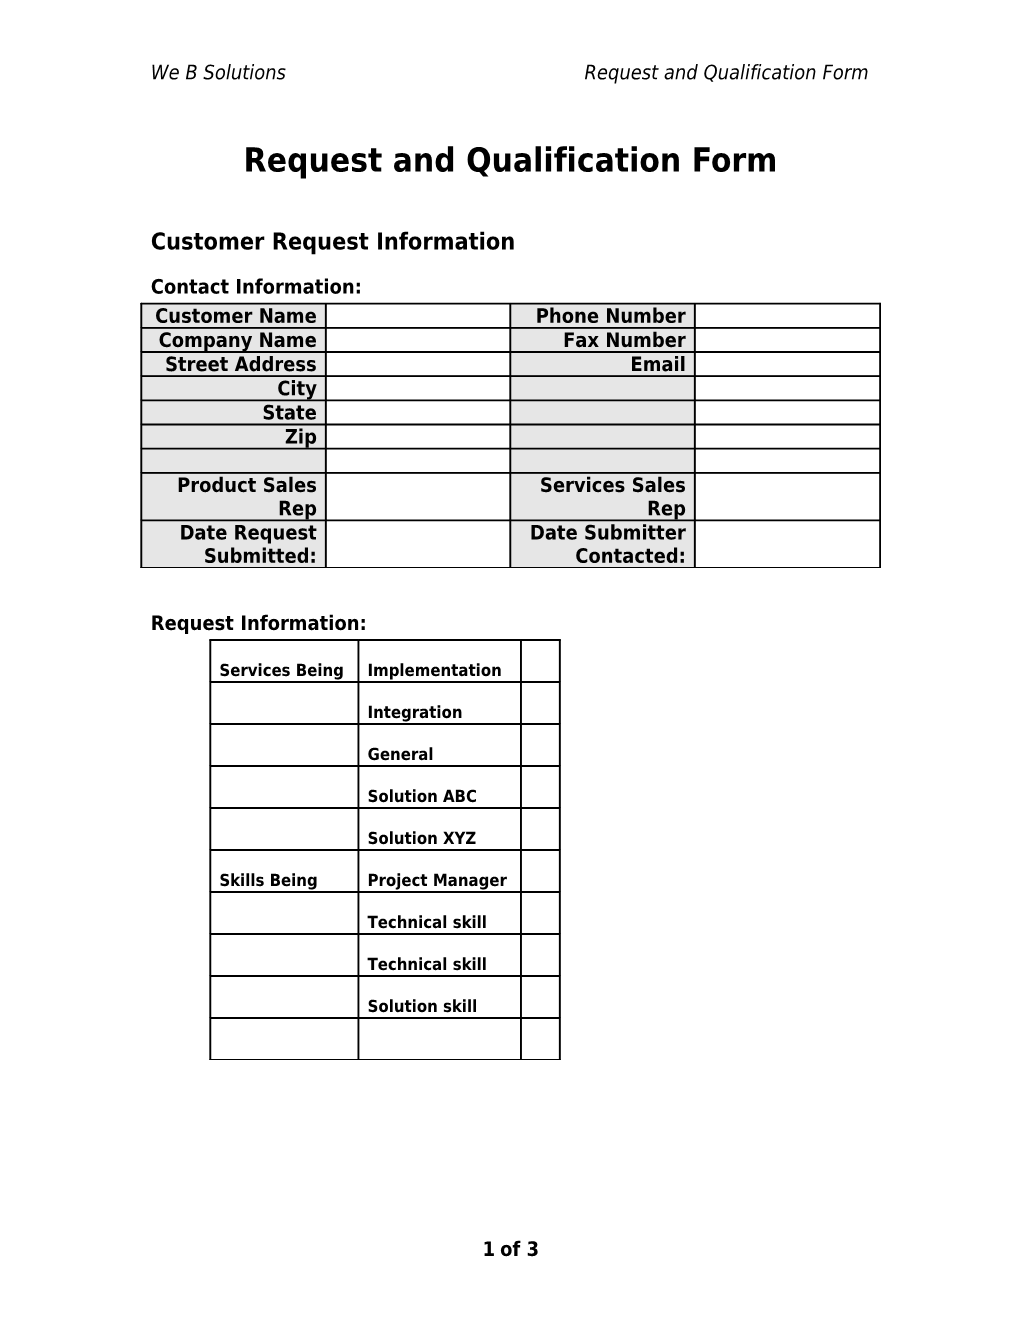 Request and Qualification Form